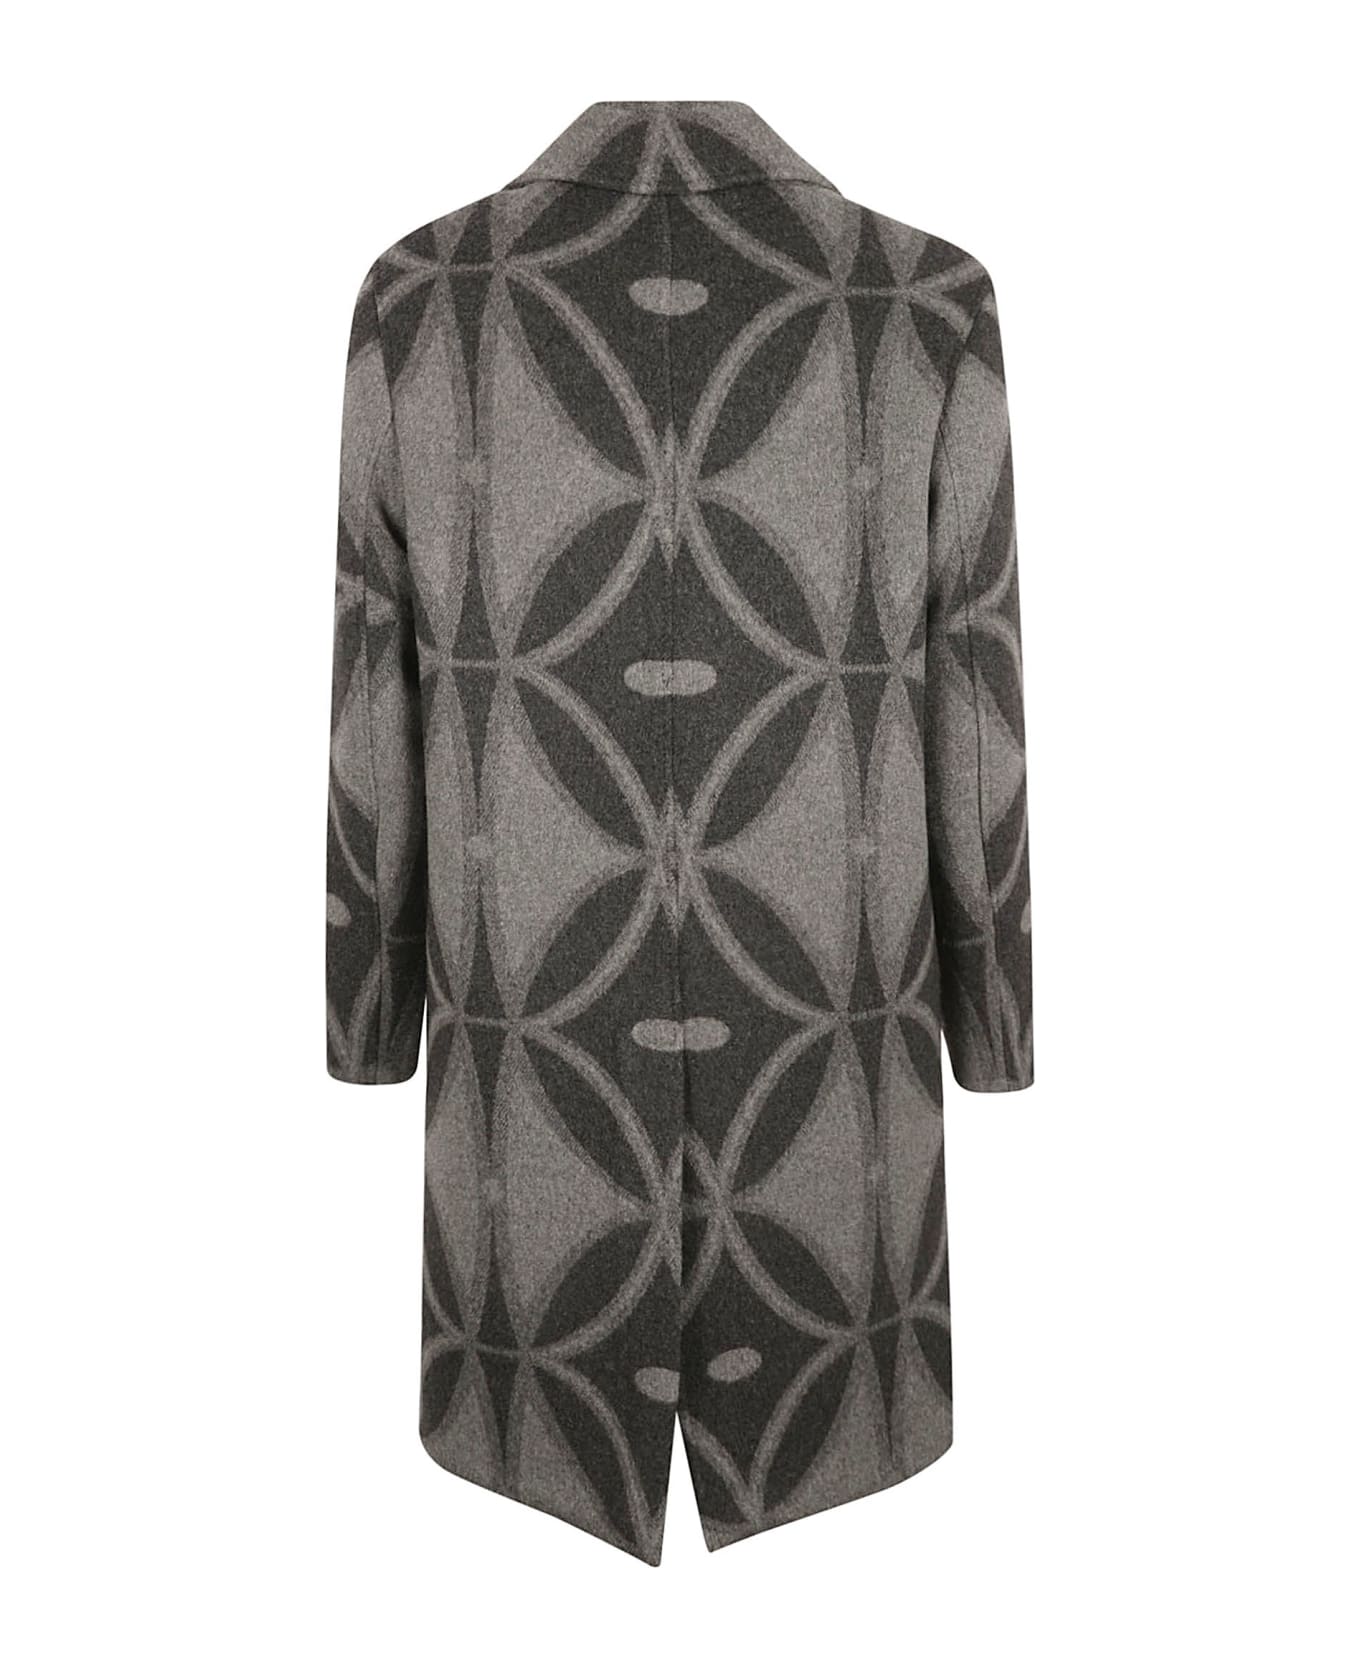 Etro Patterned Button-up Coat - Gray